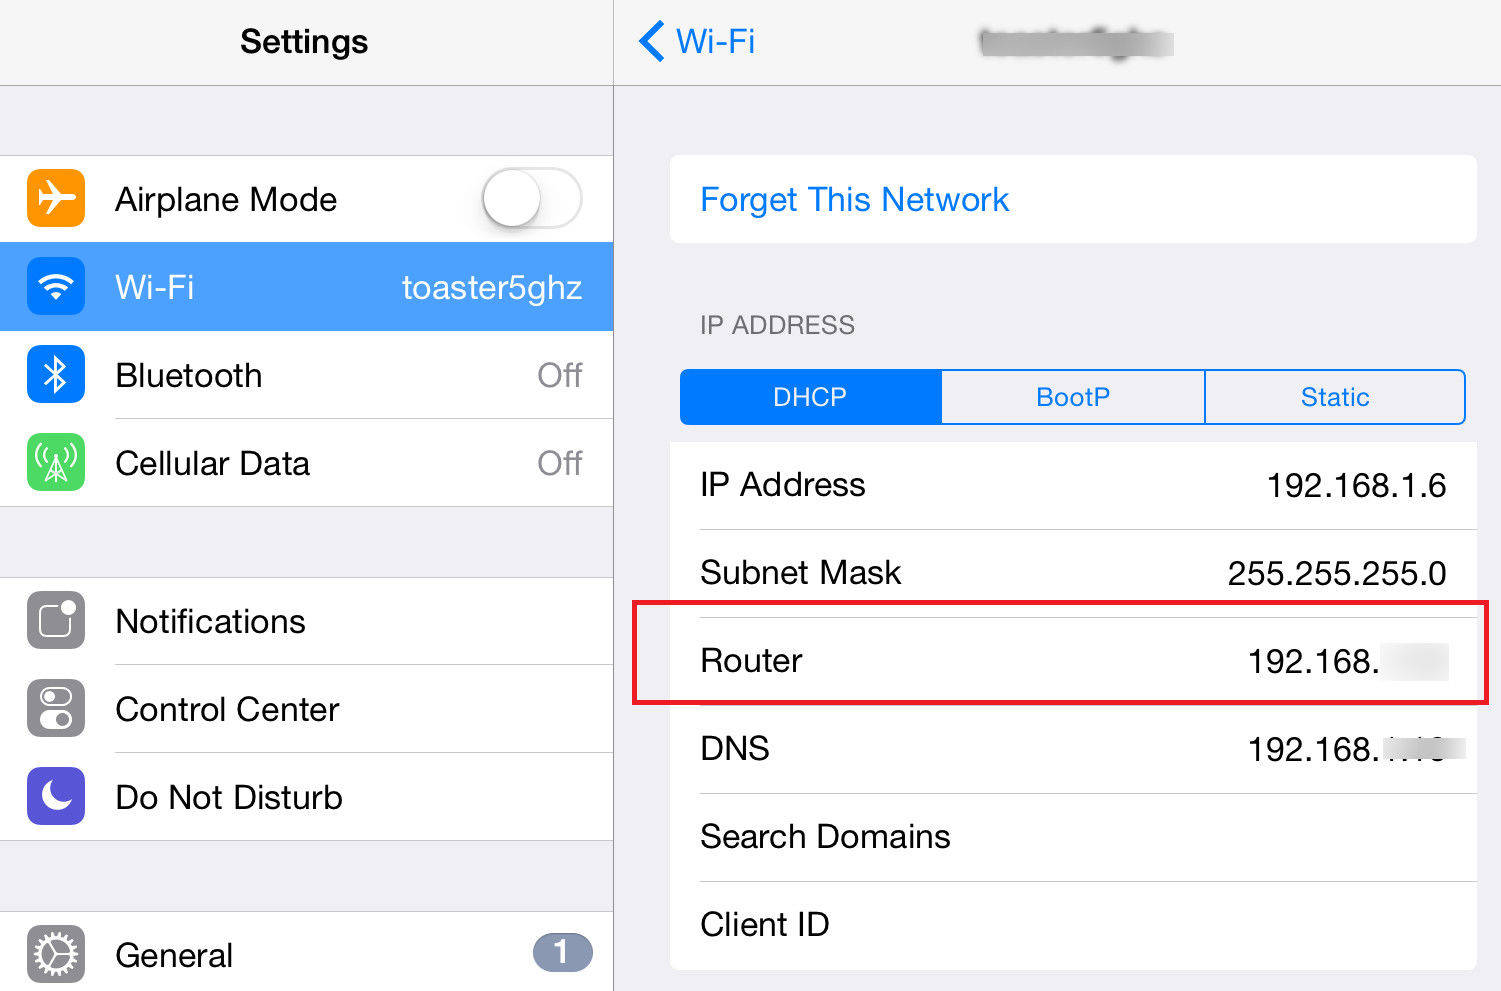 How to find the password of your saved WiFi networks on iPhone